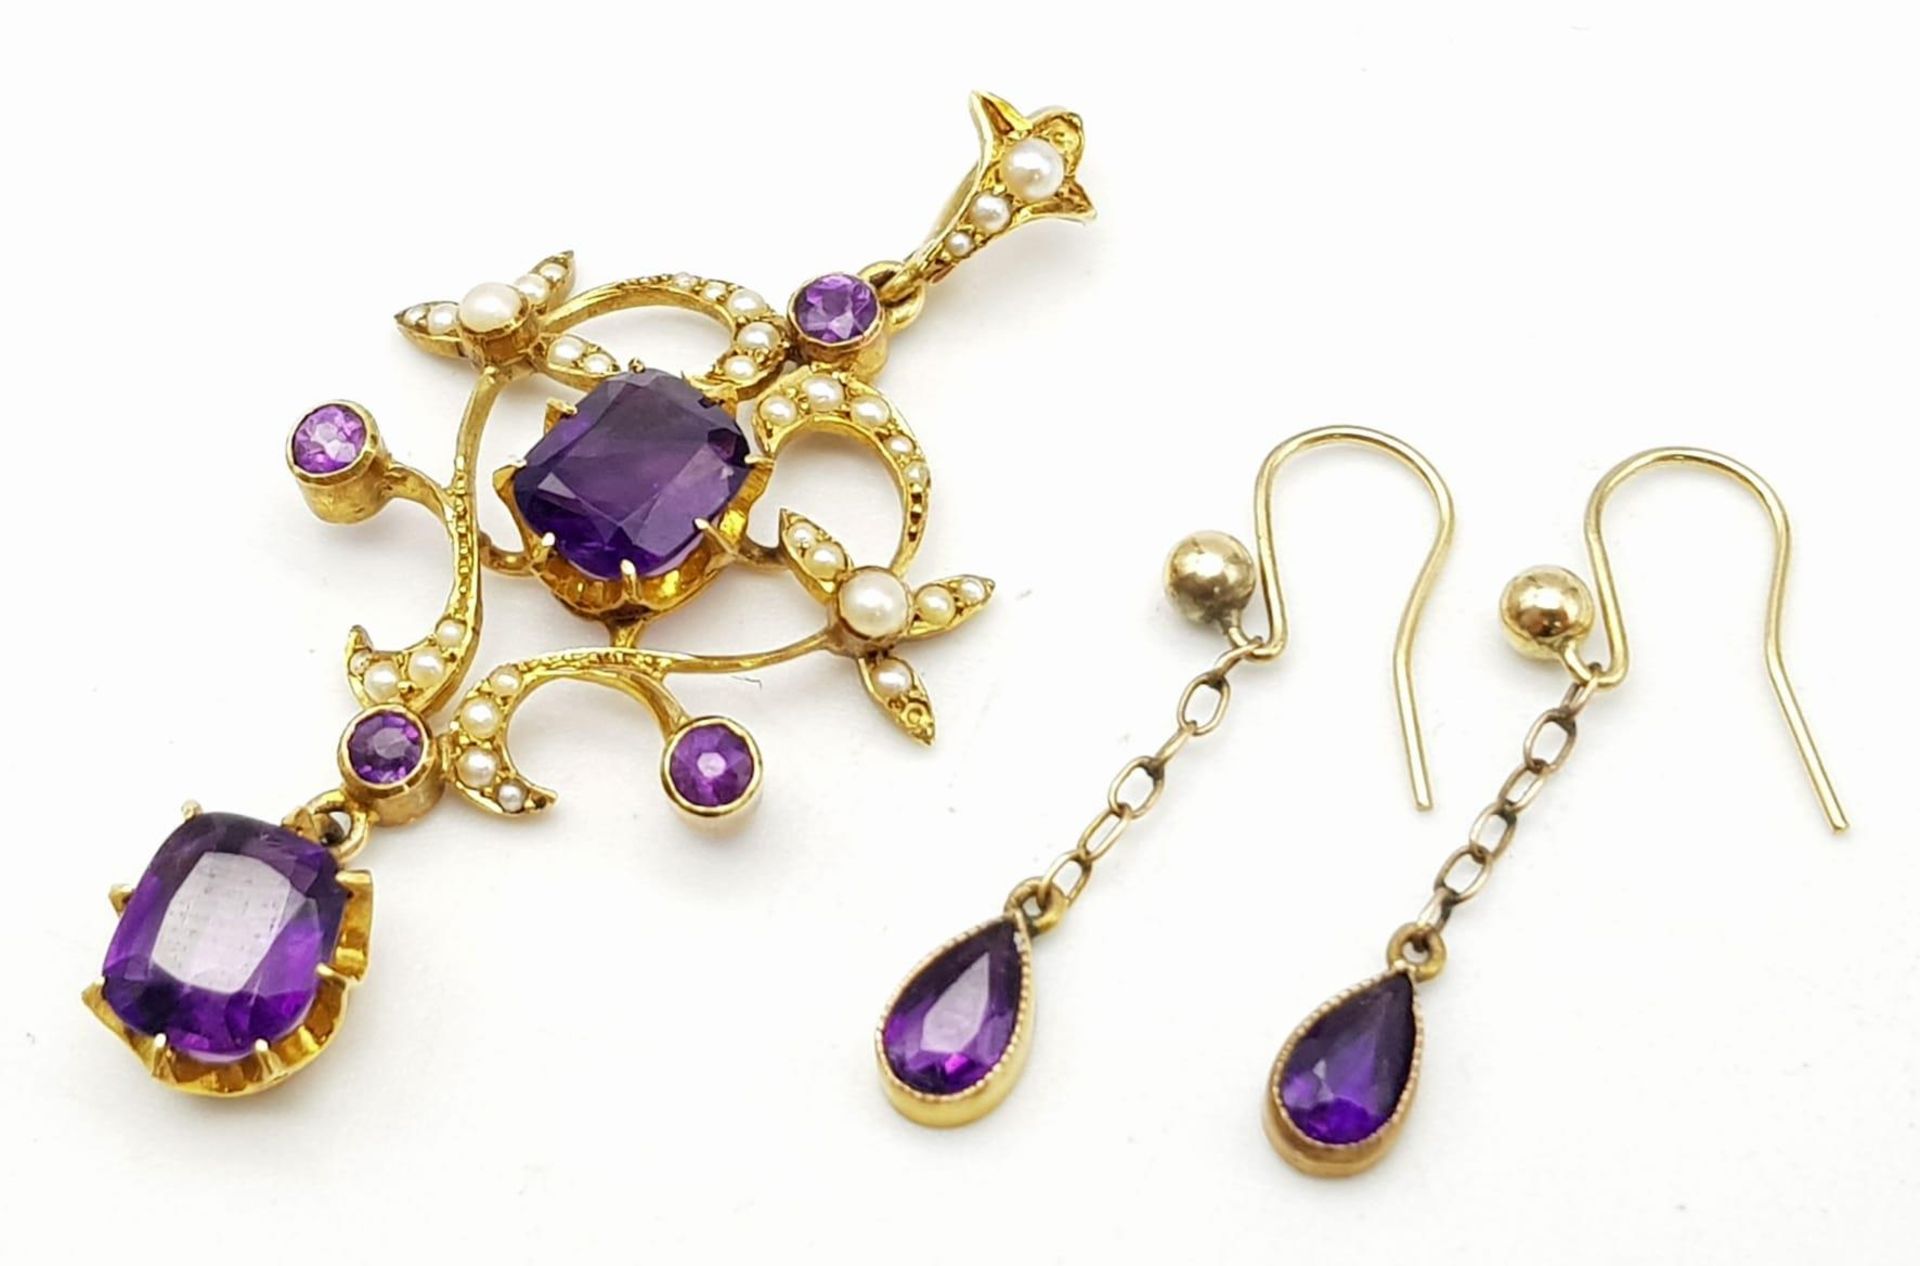 An ART NOUVEAU 9 K yellow gold pendant with vivid coloured amethysts and natural seed pearls,